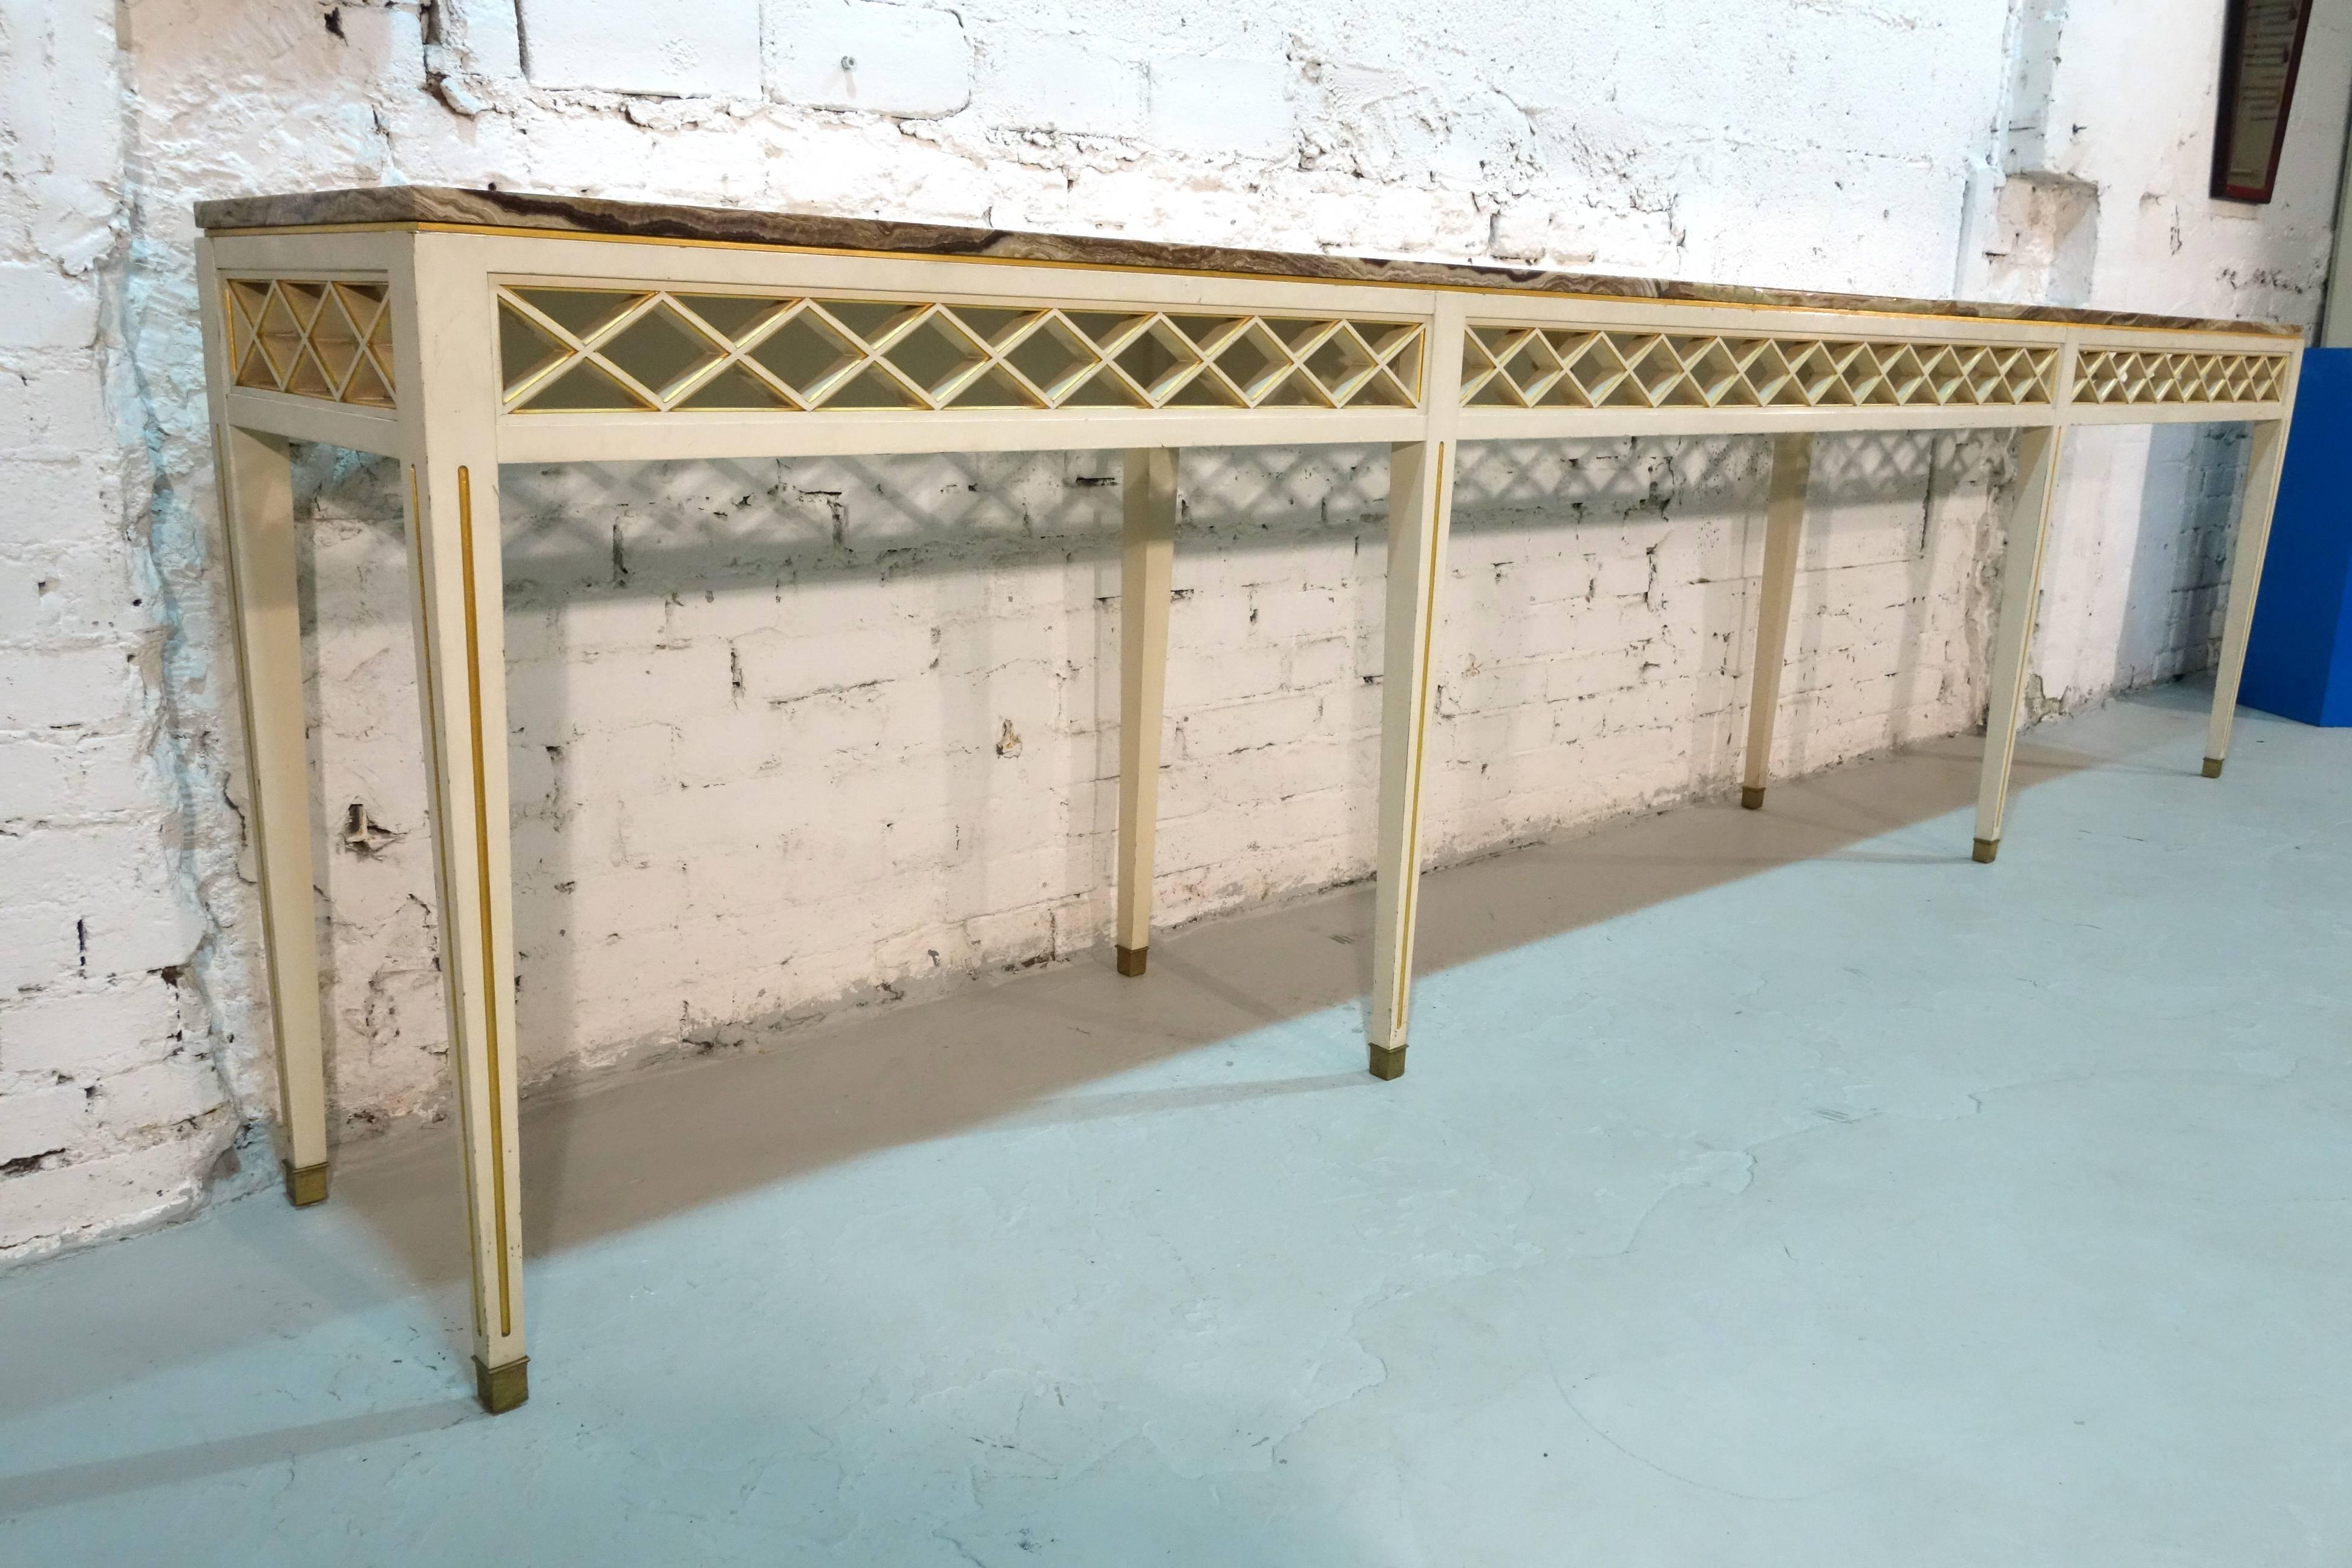 A console table designed for Bellevue Palace in Berlin by Carl-Heinz Schwennicke in 1958. Made of lacquered and giltwood, the top is comprised of five onyx slabs. This design shows inspiration by German neoclassicism as well as Maison Jansen.